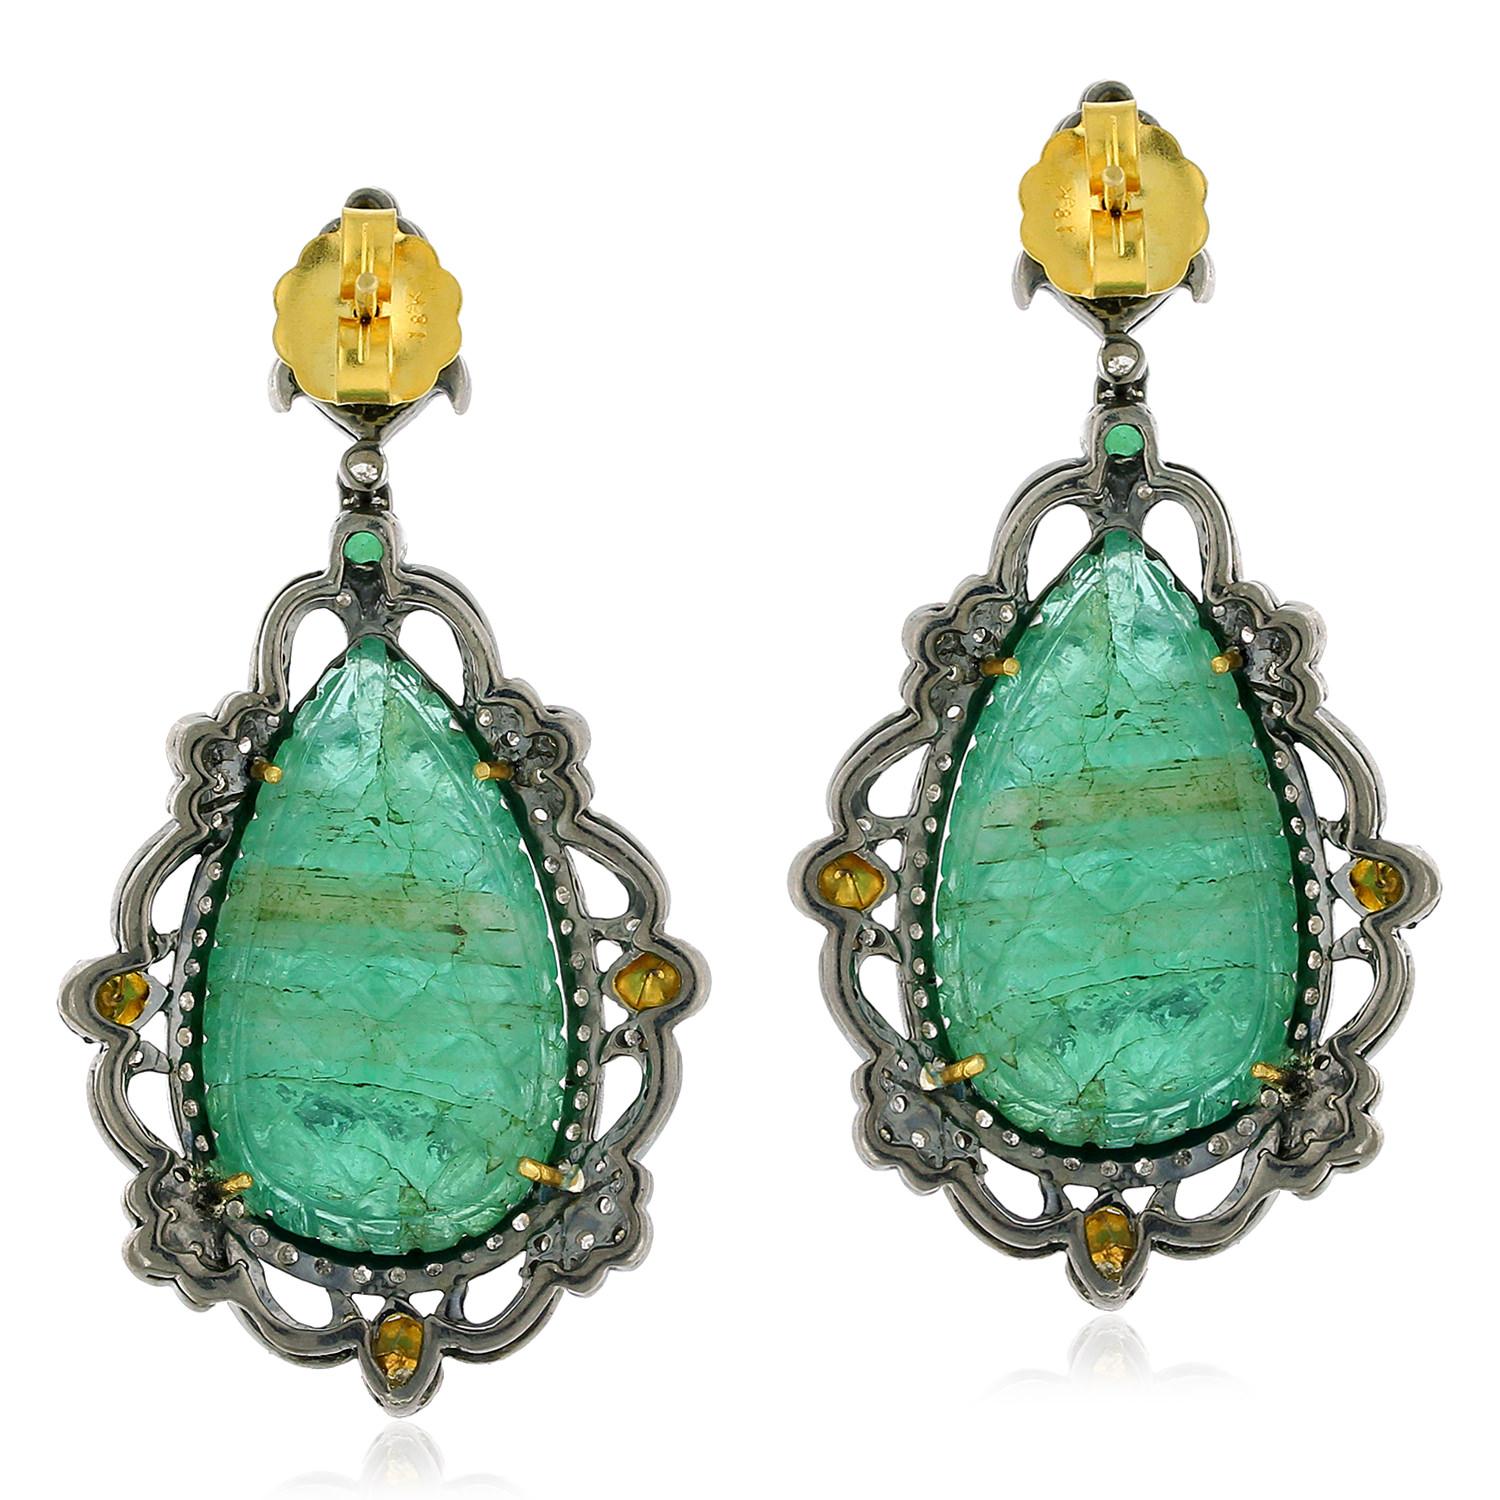 .925 Silver 18k Yellow Gold 60.9 Ct Emerald 3.19 Ct Diamond Pave Dangle Earrings

60.95 CT Emerald and Round cut diamonds 3.19 Carat set in .925 Sterling Silver and 18k Yellow Gold Dangle Earrings.

We guarantee all products sold and our number one